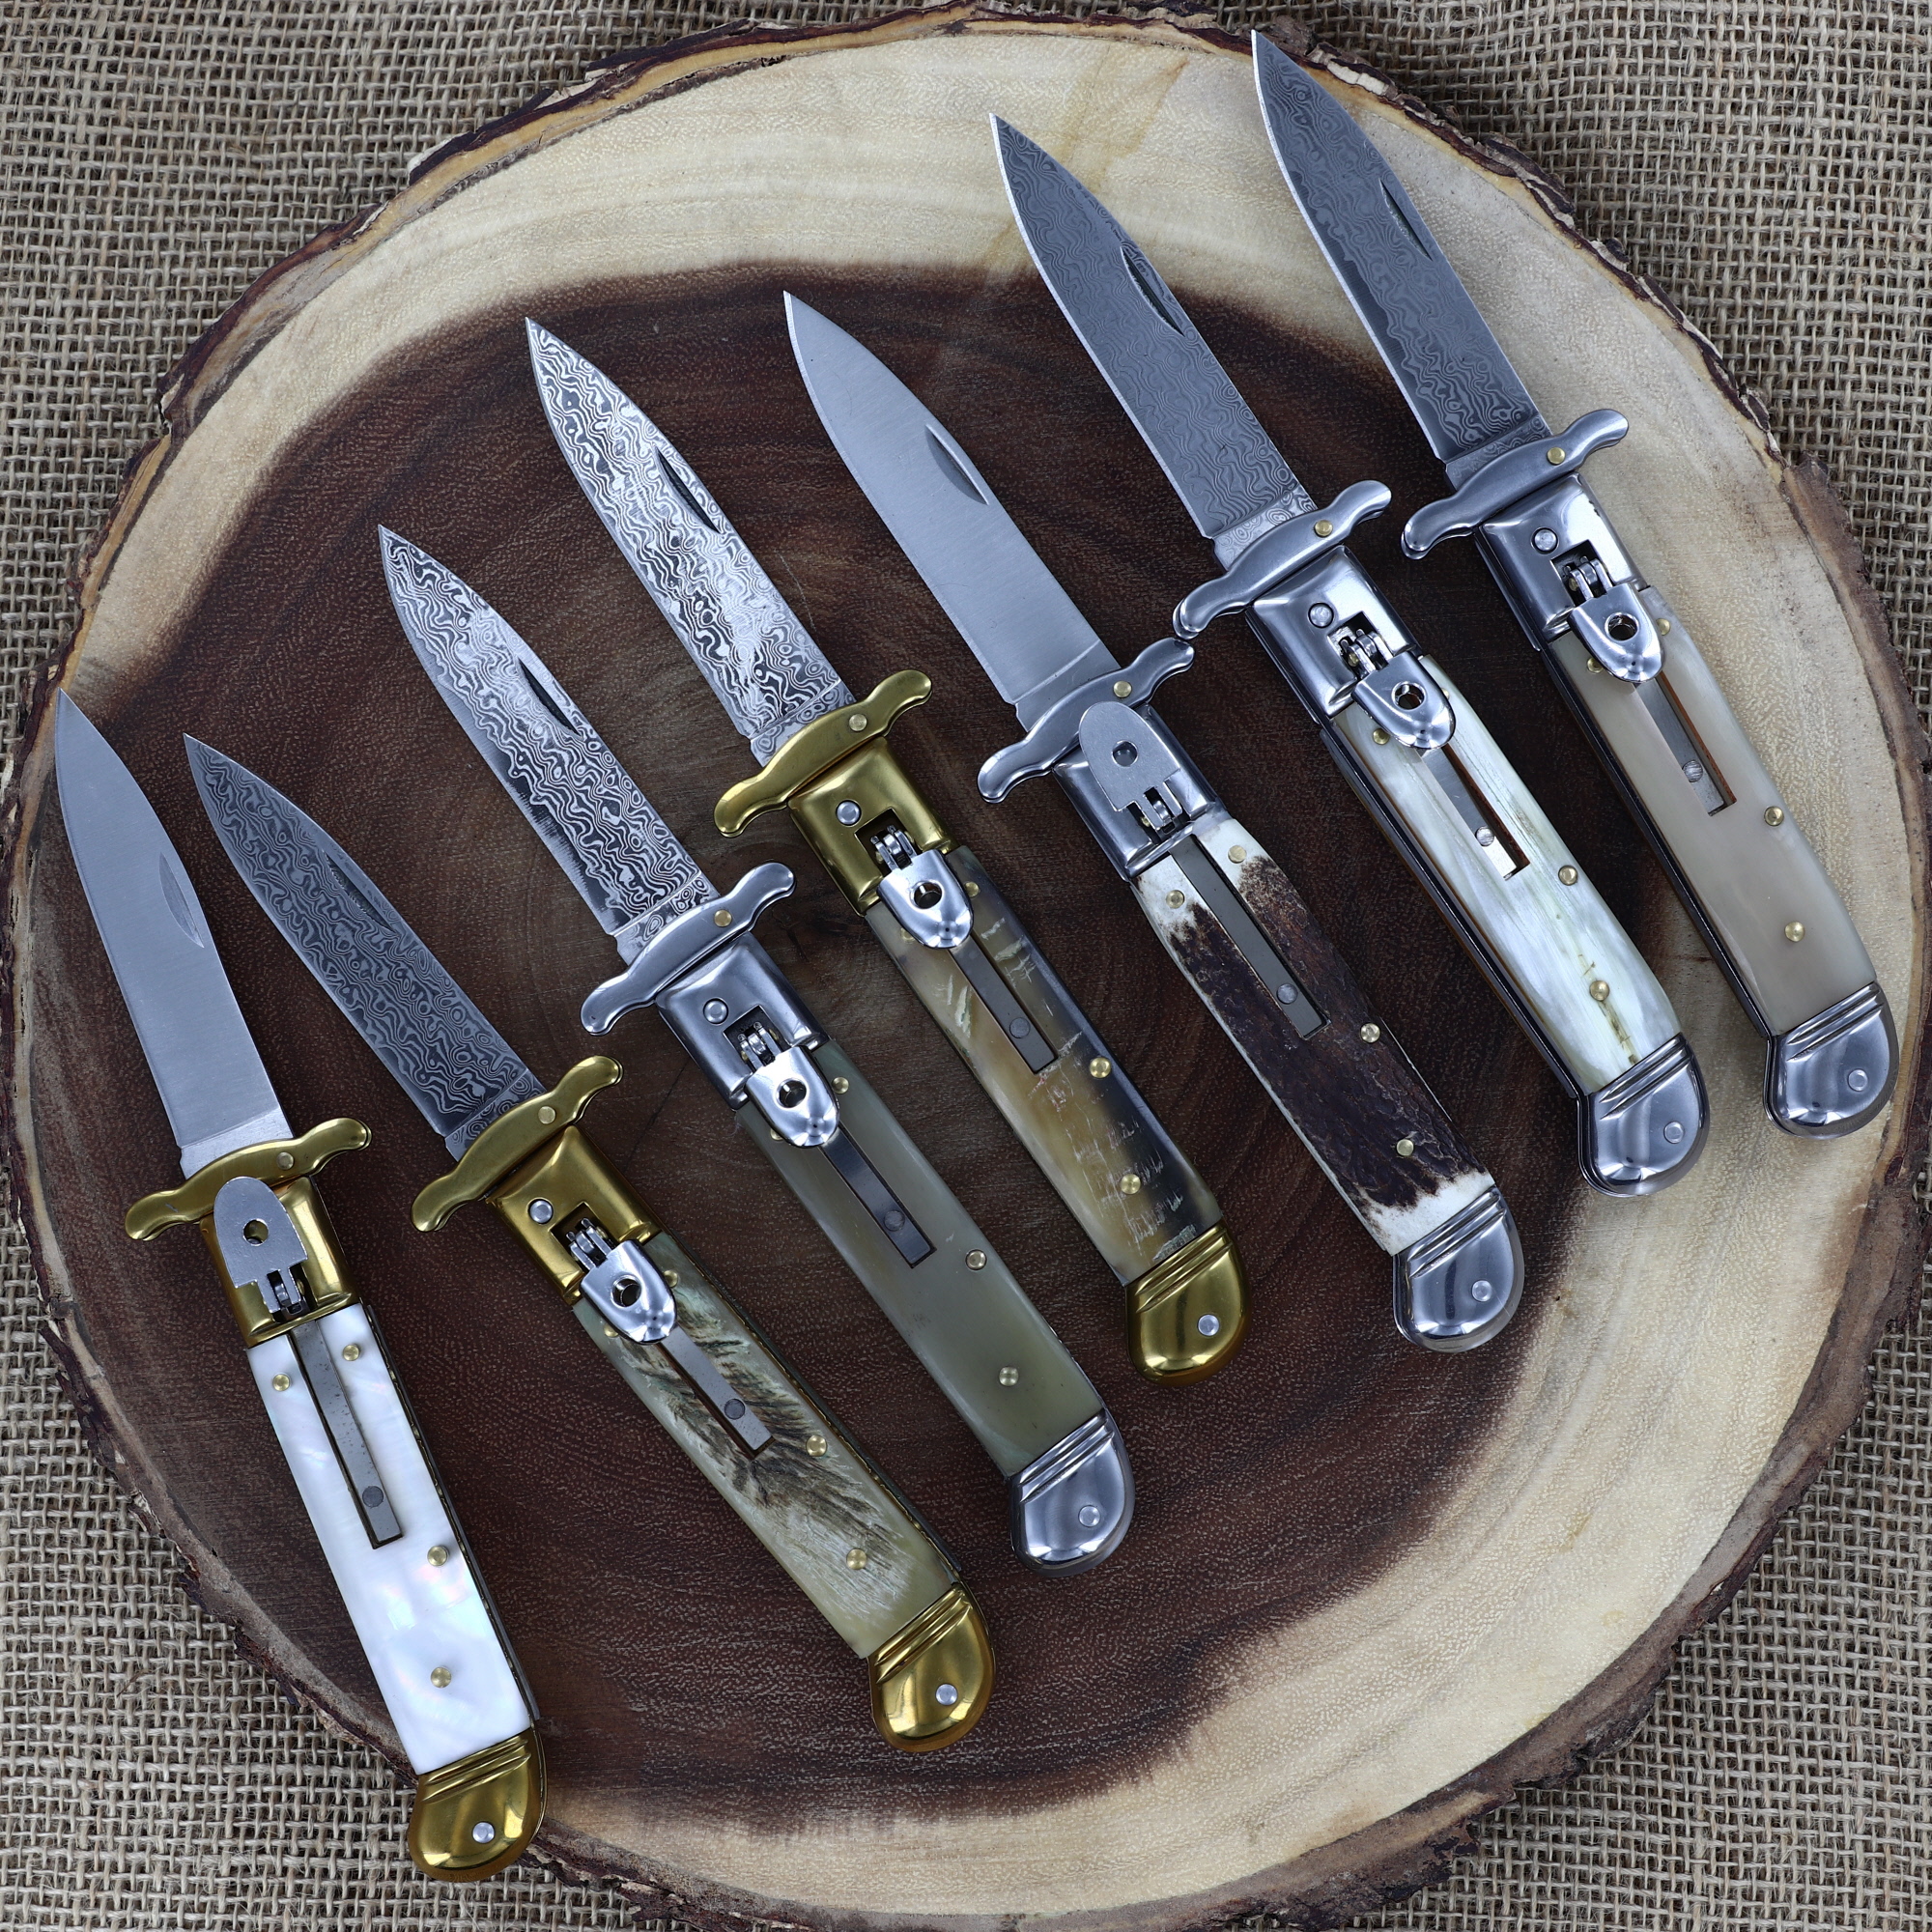 Organic Steel Automatic Lever Lock Stiletto KNIVES Choice of 7 Horn and Pearl Grips Damascus/ Stainl